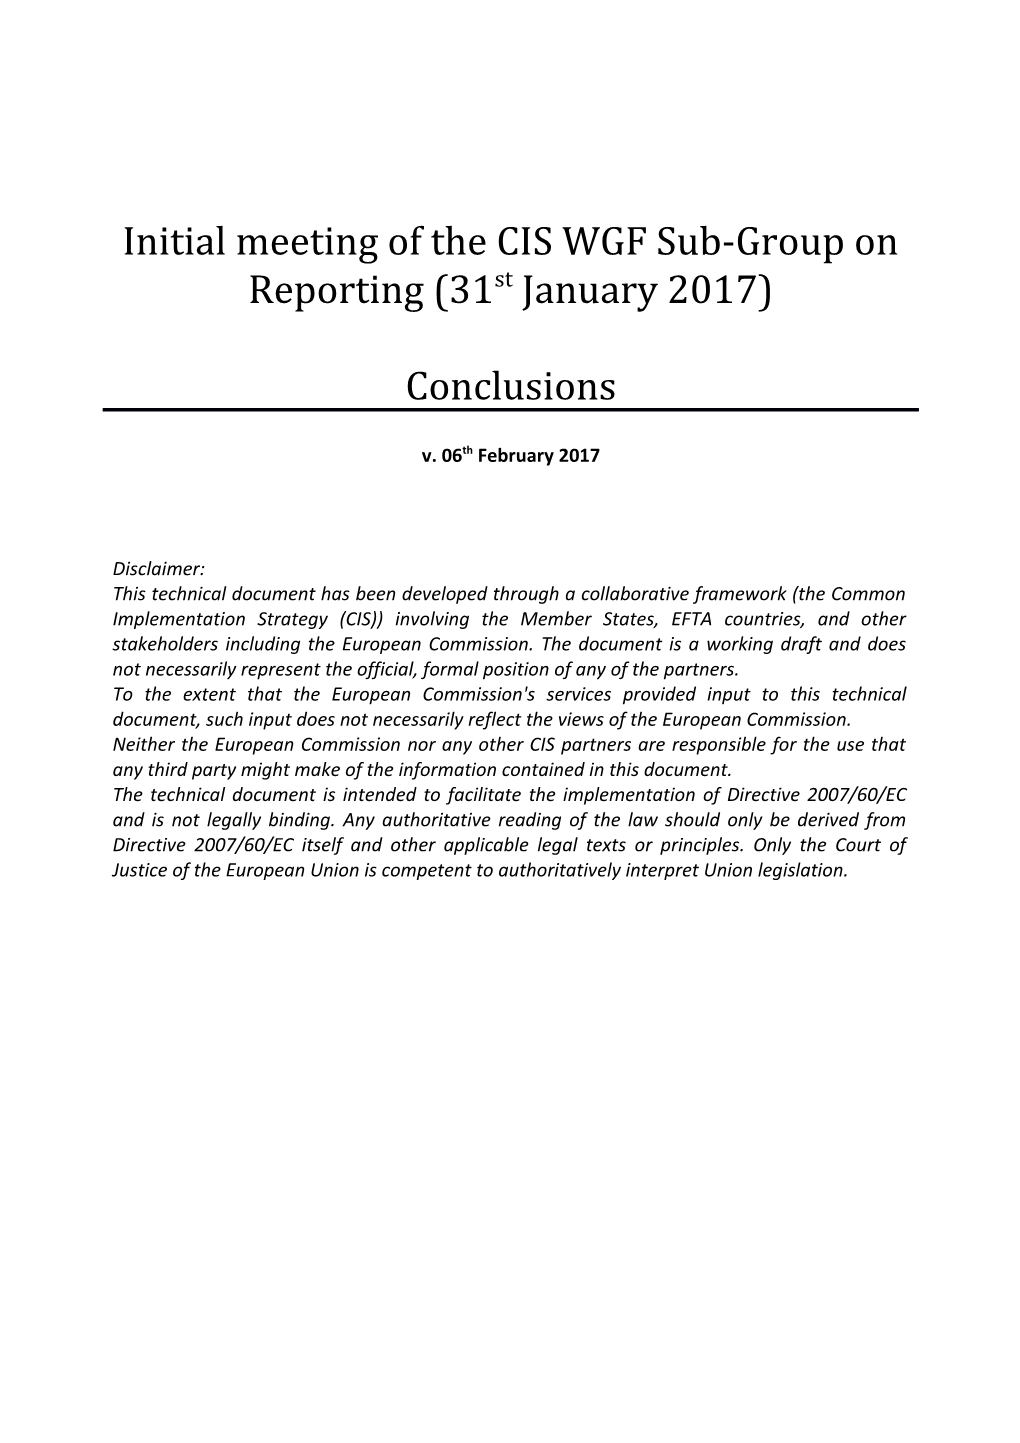 Conclusions - Initial Meeting of the CIS WGF Sub-Group on Reporting